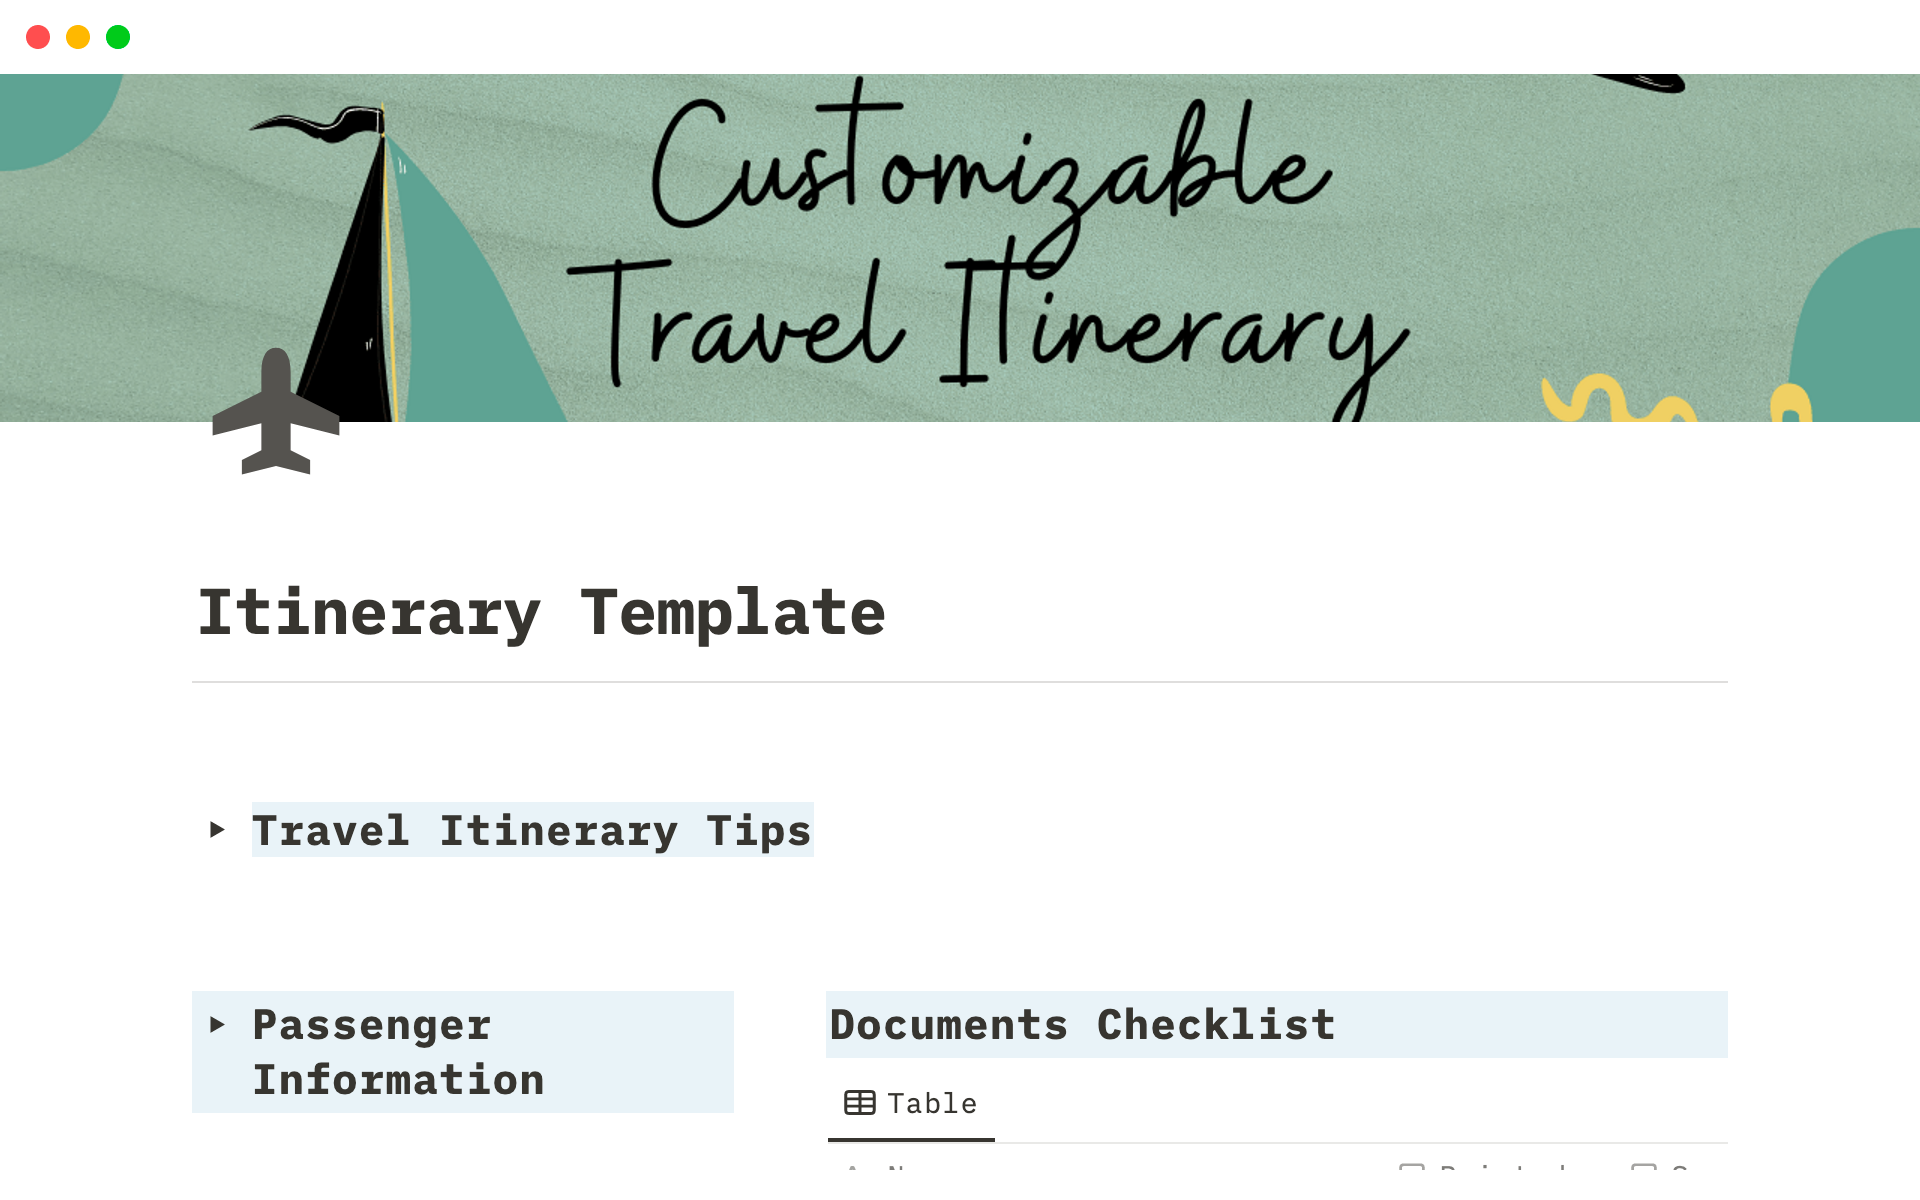 Start planning your dream vacation today with our customizable travel itinerary product.